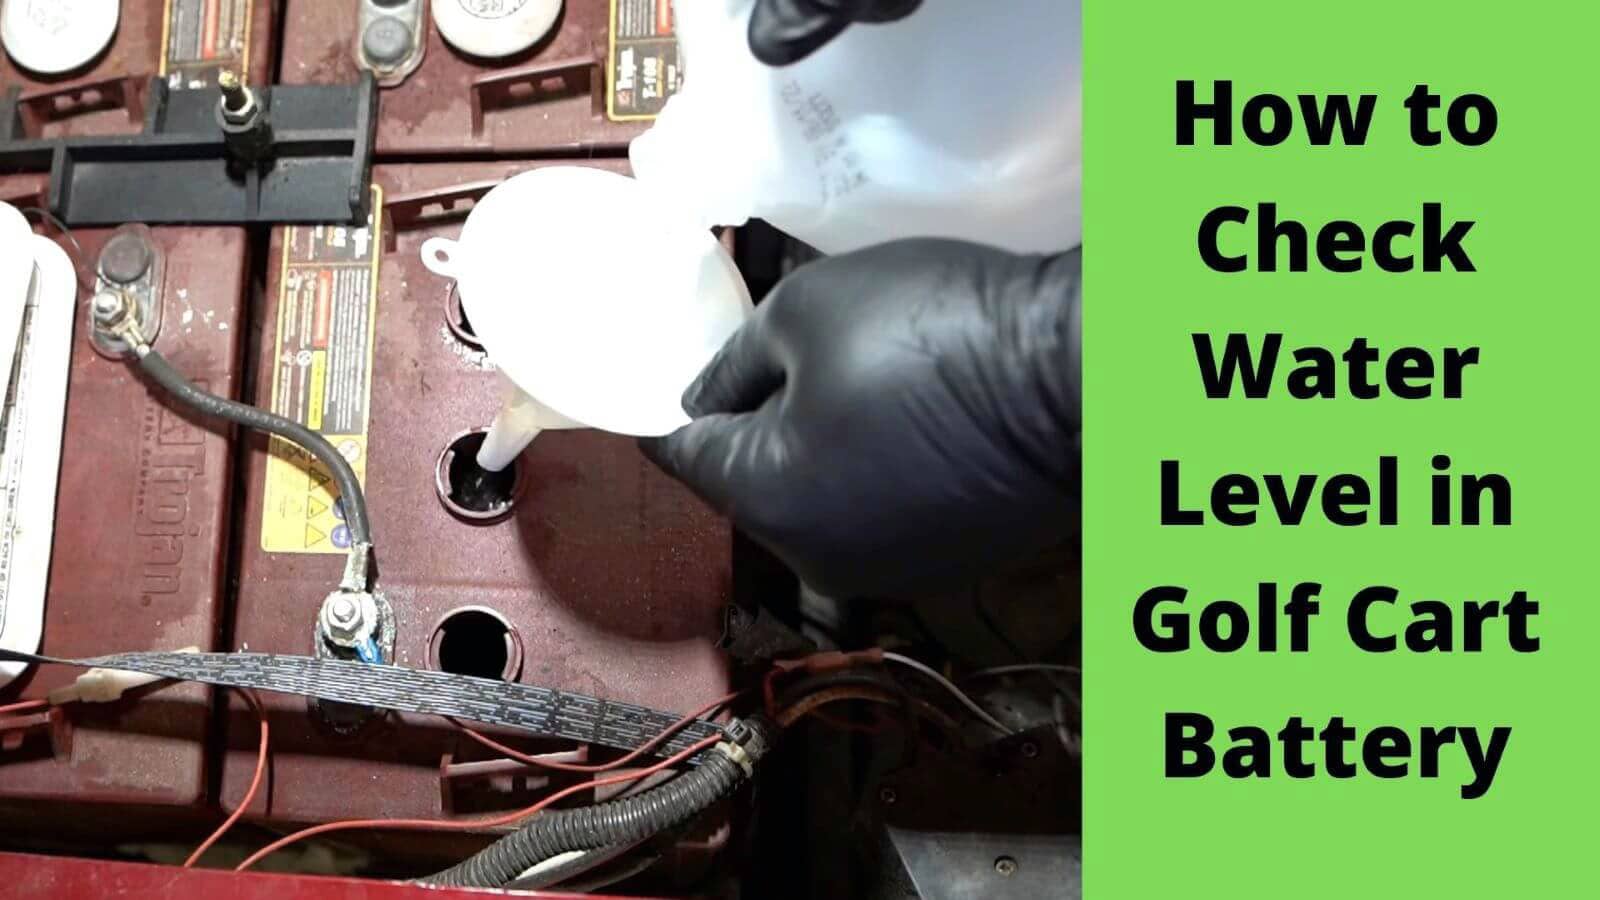 How to Check Water Level in Golf Cart Battery?